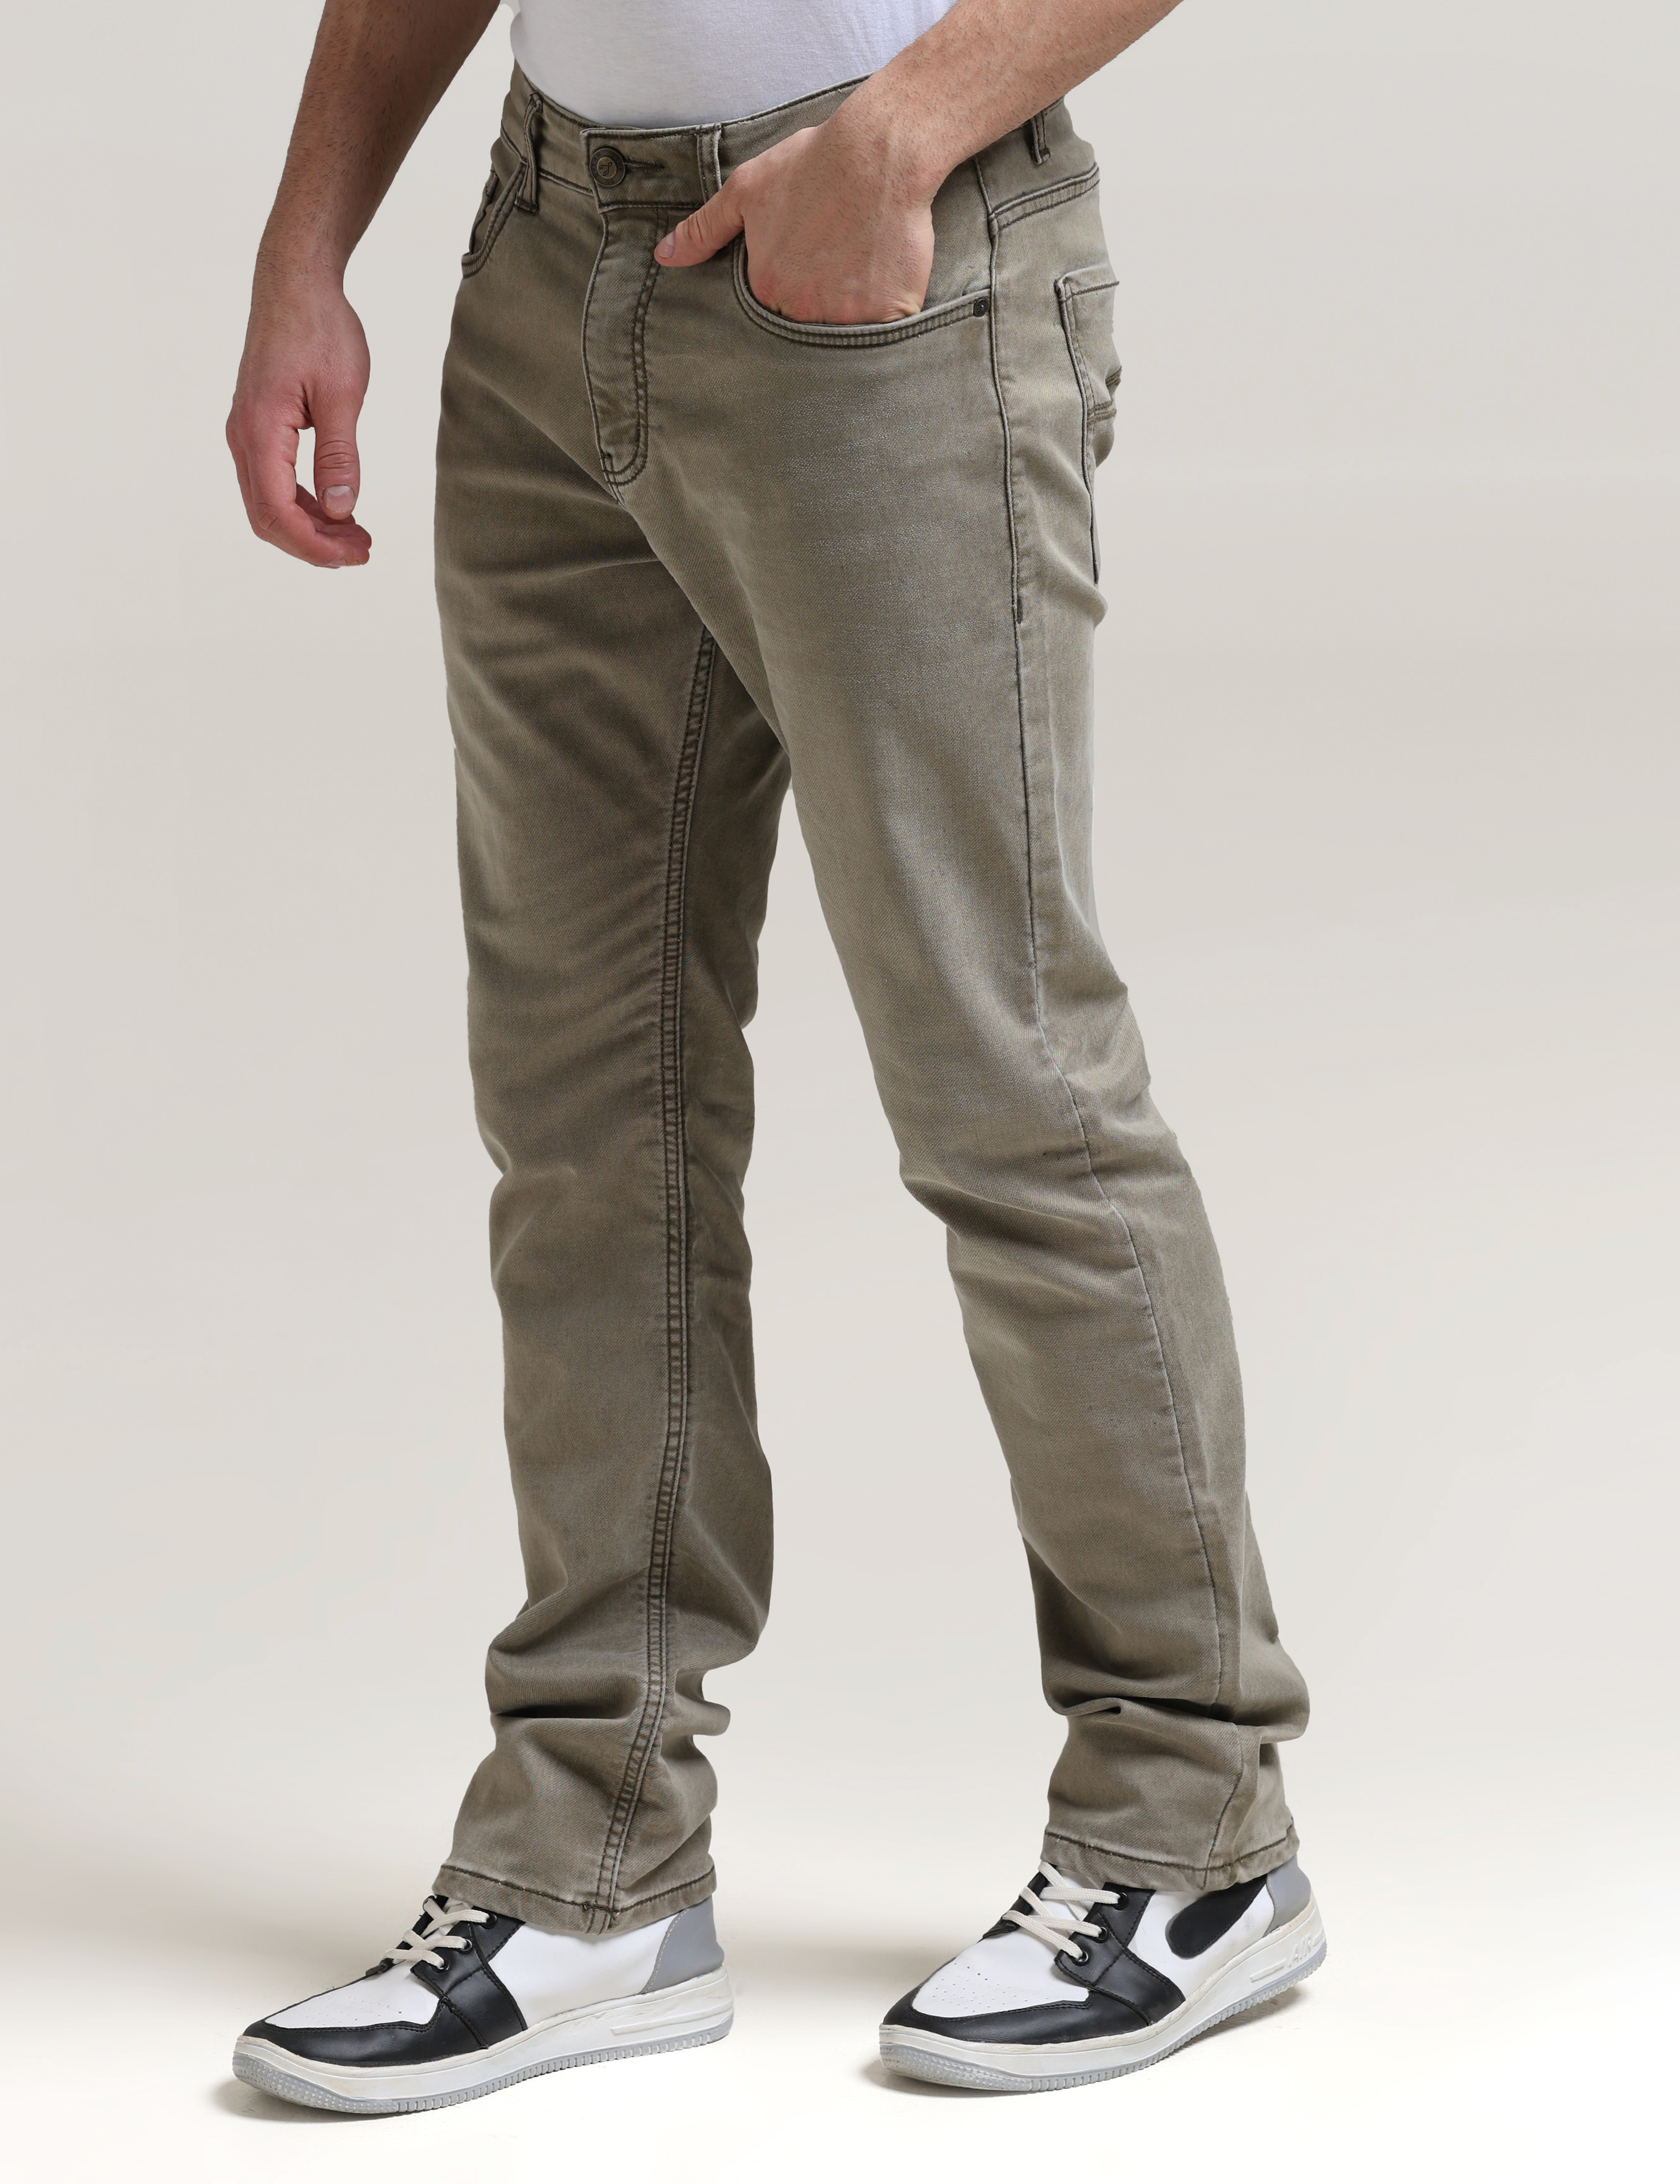 Buy Olive Green Jeans for Men by SIN Online | Ajio.com